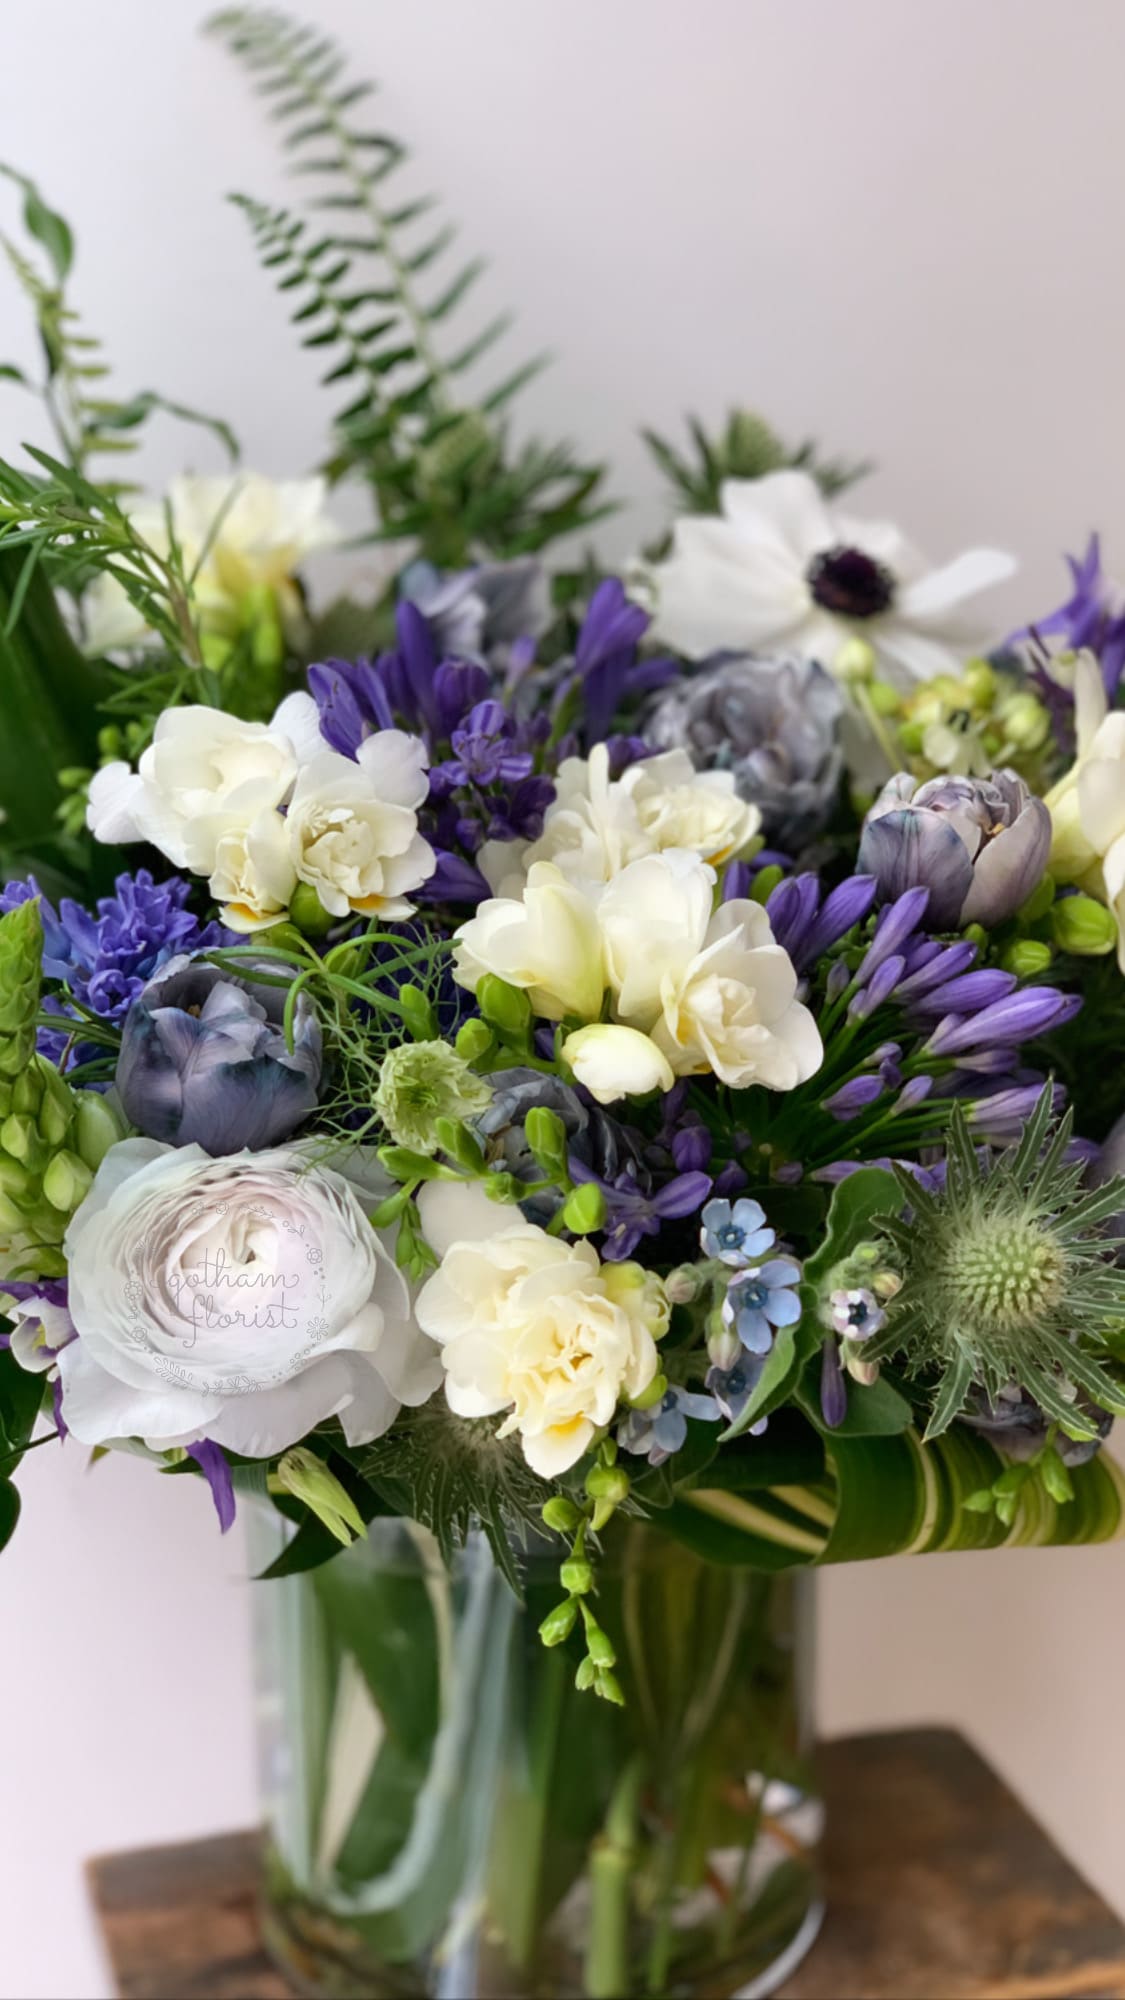 Blu - A beautiful mix of blue and whites florals. Pictured are thistle, iris and lisanthus. Cool and modern. Send the best flowers from the best flower shop in New York. We offer same day flower delivery in Manhattan, Queens, Bronx, Brooklyn, Staten Island and West Chester counties. We have the prettiest and most luxurious flowers to choose from and our designs are unique and whimsical. We carry Peonies almost every day of the year!!#mercuryvase #weddingflowers #luxuryflowers #ranunculus #peony #peonies #flowerdelivery #samedaydelivery